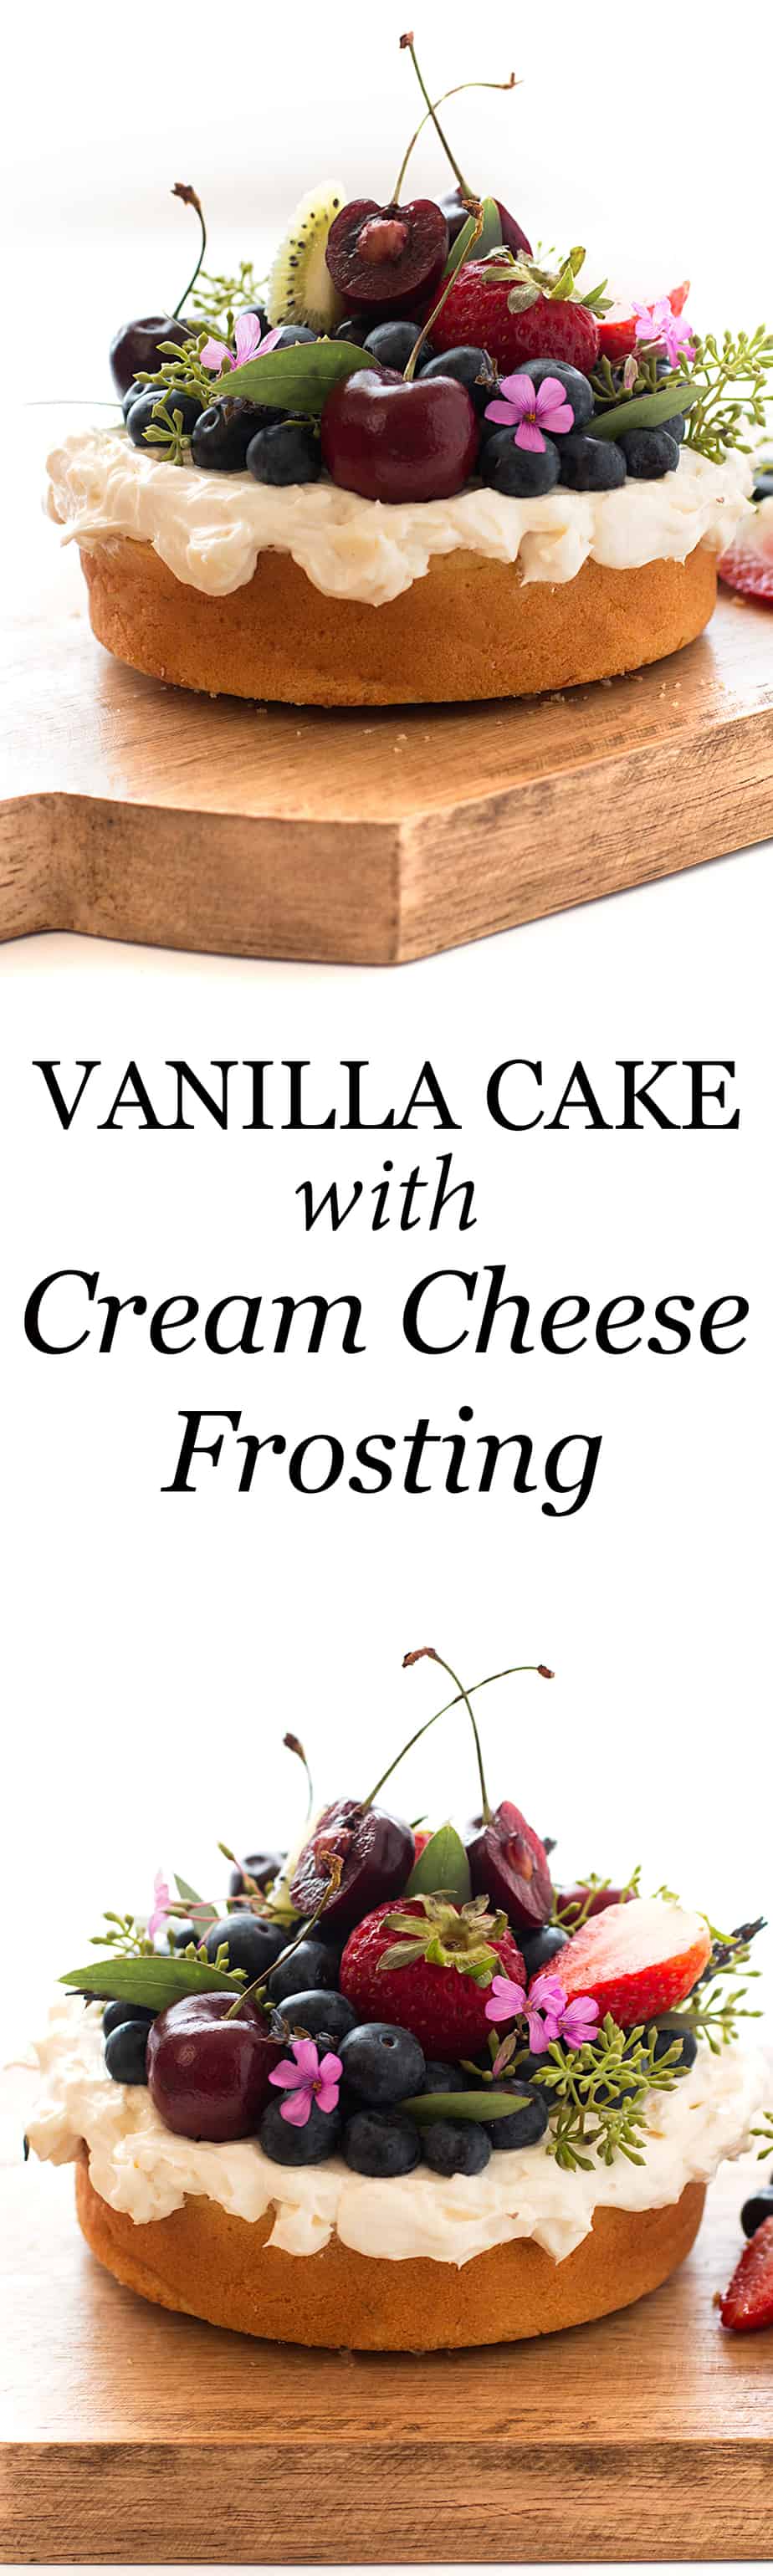 vanilla-cake-cream-cheese-frosting-recipe. Cream cheese frosting is a favorite of mine, especially when incorporating it into a vanilla cake from scratch. I think it’s the highlight of the attached cake recipe , which also has fresh berries and a nice red, white and blue theme. 